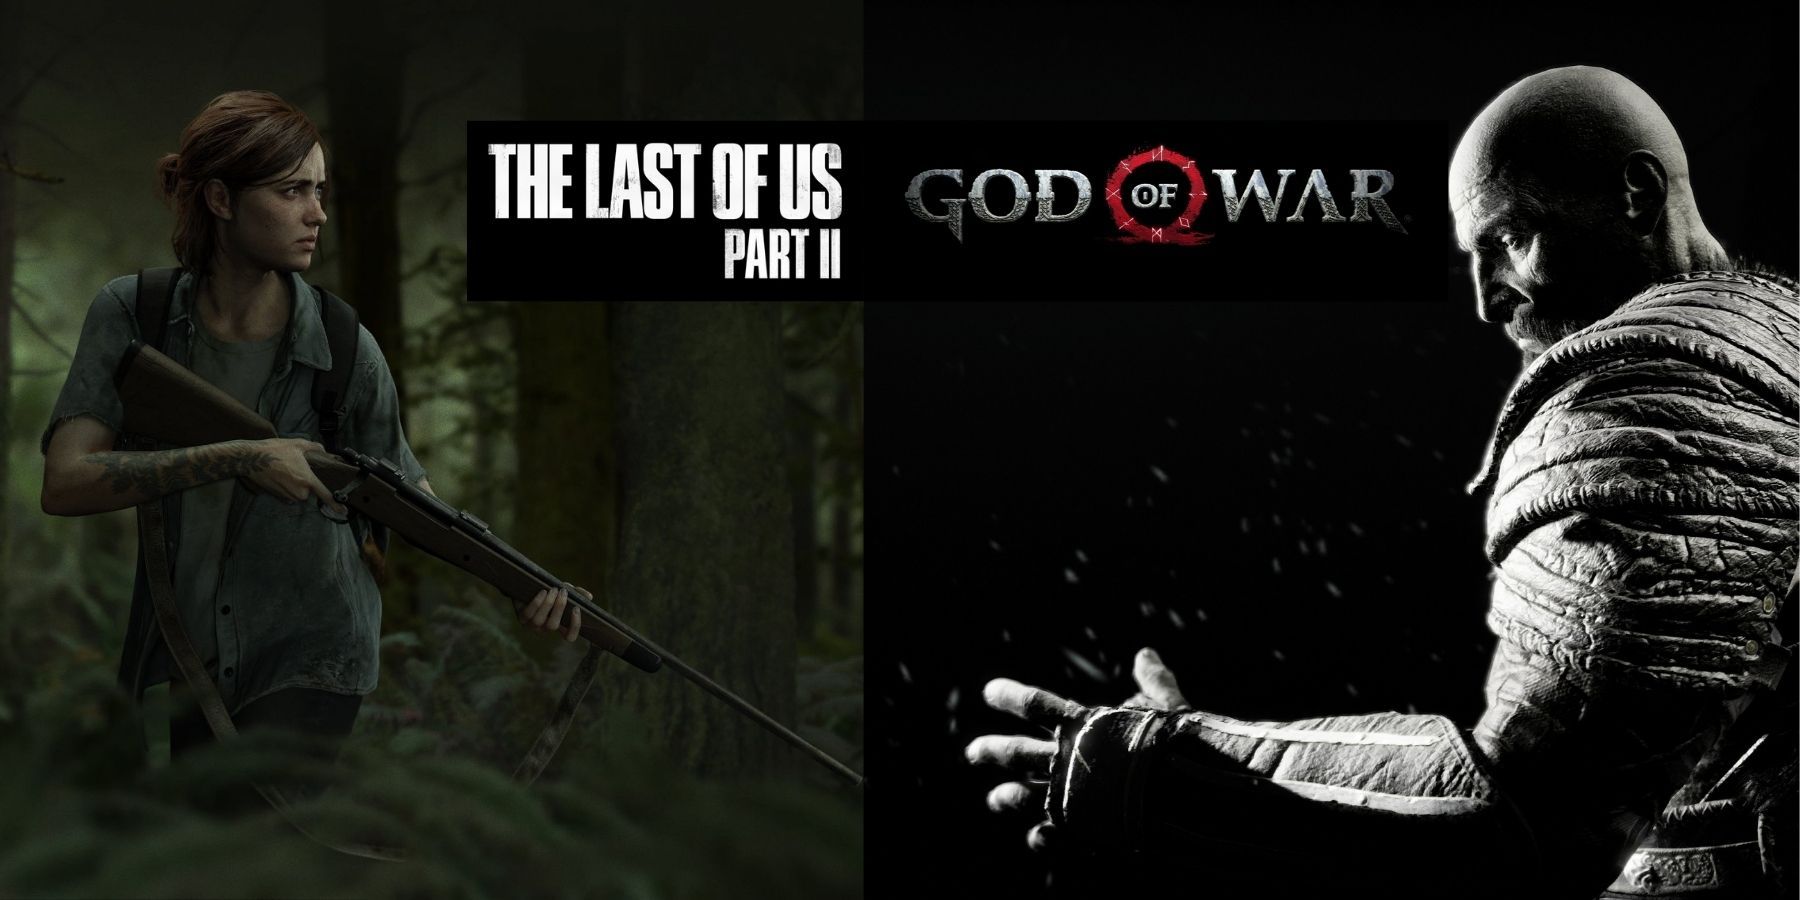 The Last of Us 2 God of War